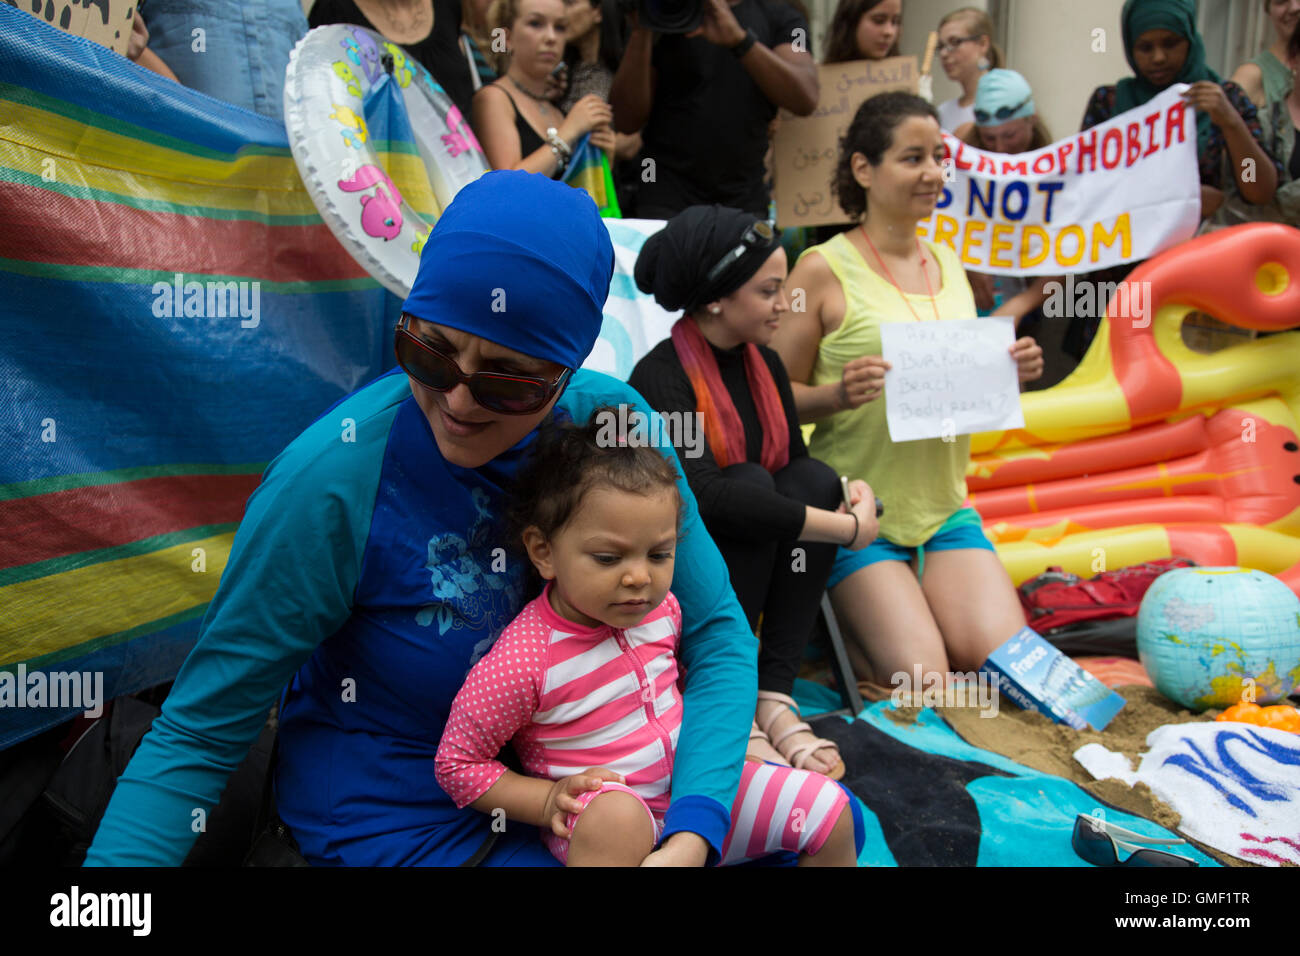 London, UK. 25th August, 2016. Wear what you want protest at the French embassy against the burkini ban for Muslim women on France’s beaches on 25th August 2016 in London, United Kingdom. Activists called on fellow supporters to descend on Knightsbridge saying “Come along to the French embassy and wear what you want - burkinis, bikinis, anything goes. Bring beach gear: beach umbrellas, towels, bat and ball, boules... Credit:  Michael Kemp/Alamy Live News Stock Photo